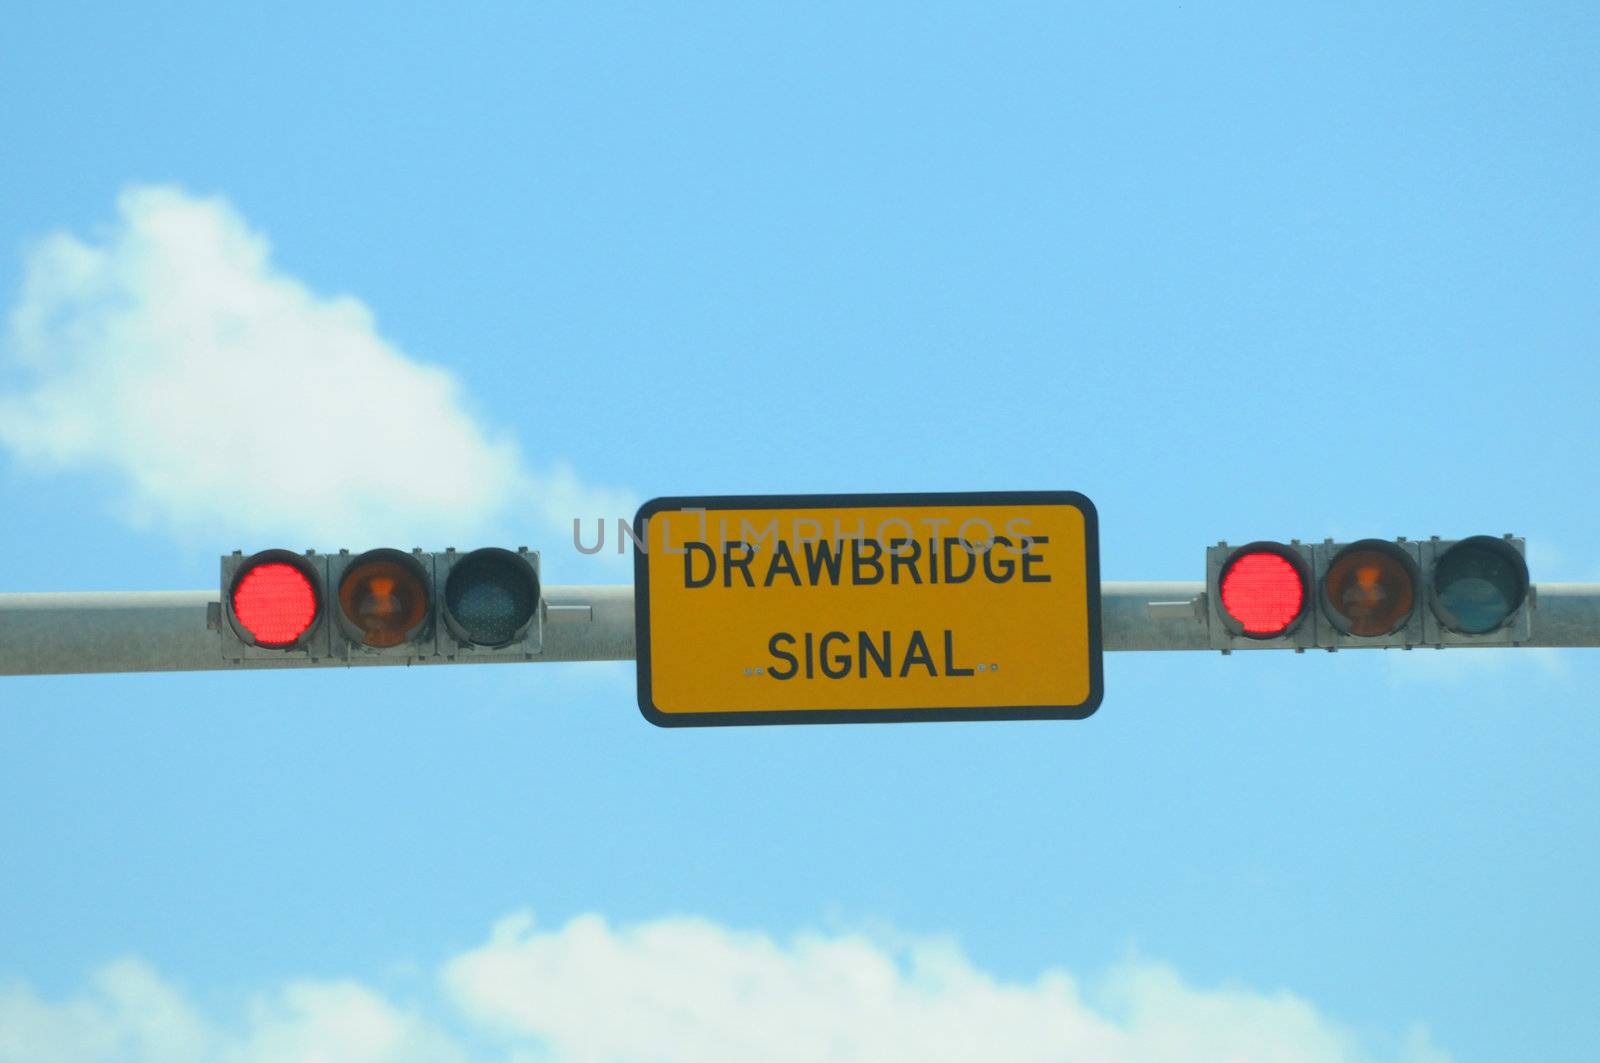 stop for drawbridge sign for a warning when bridge is up